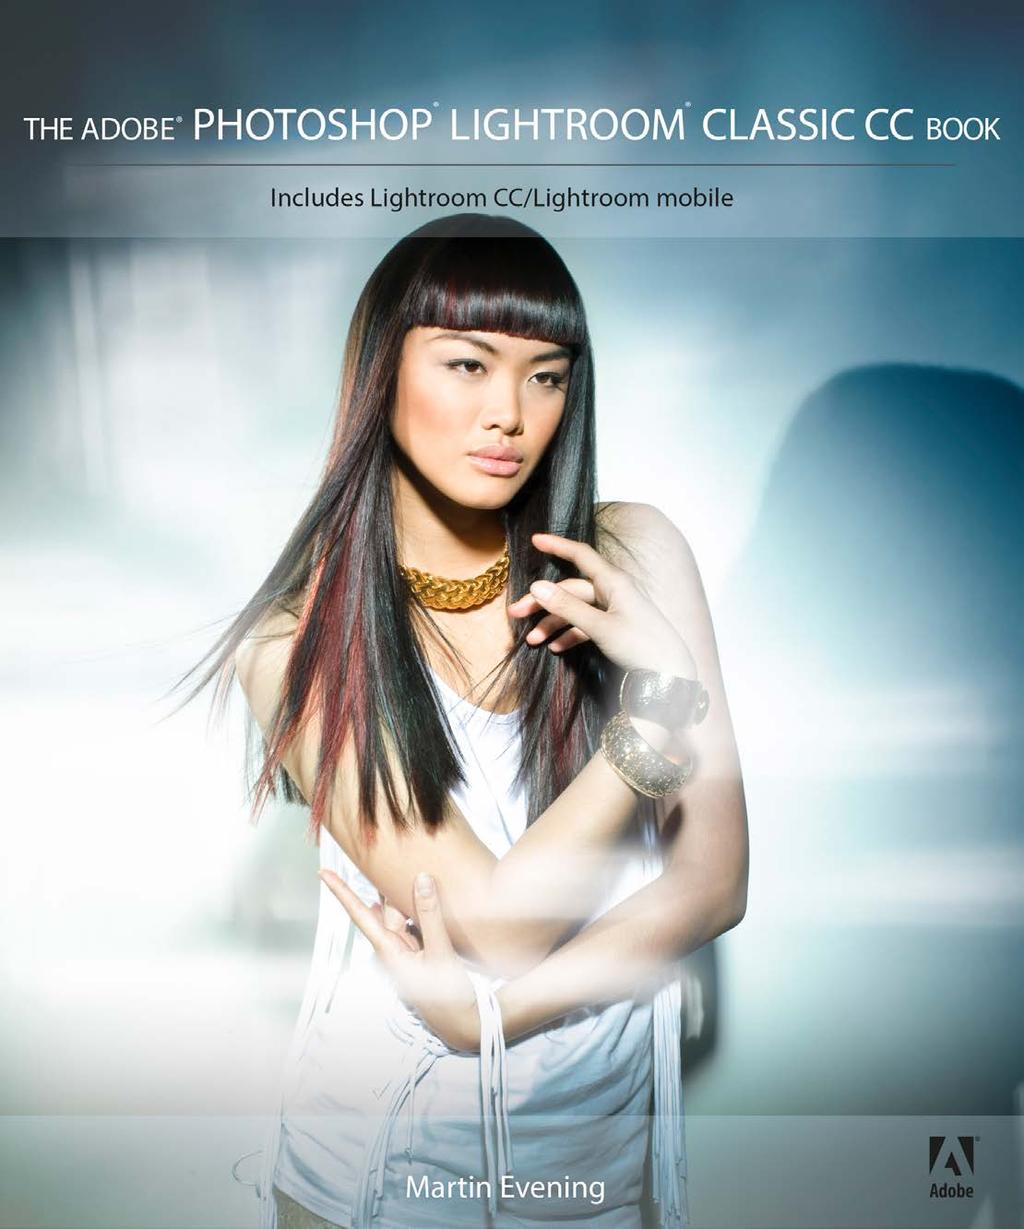 The Adobe Photoshop Lightroom Classic CC Book by Martin Evening 752 pages + Website with videos and free downloads www.